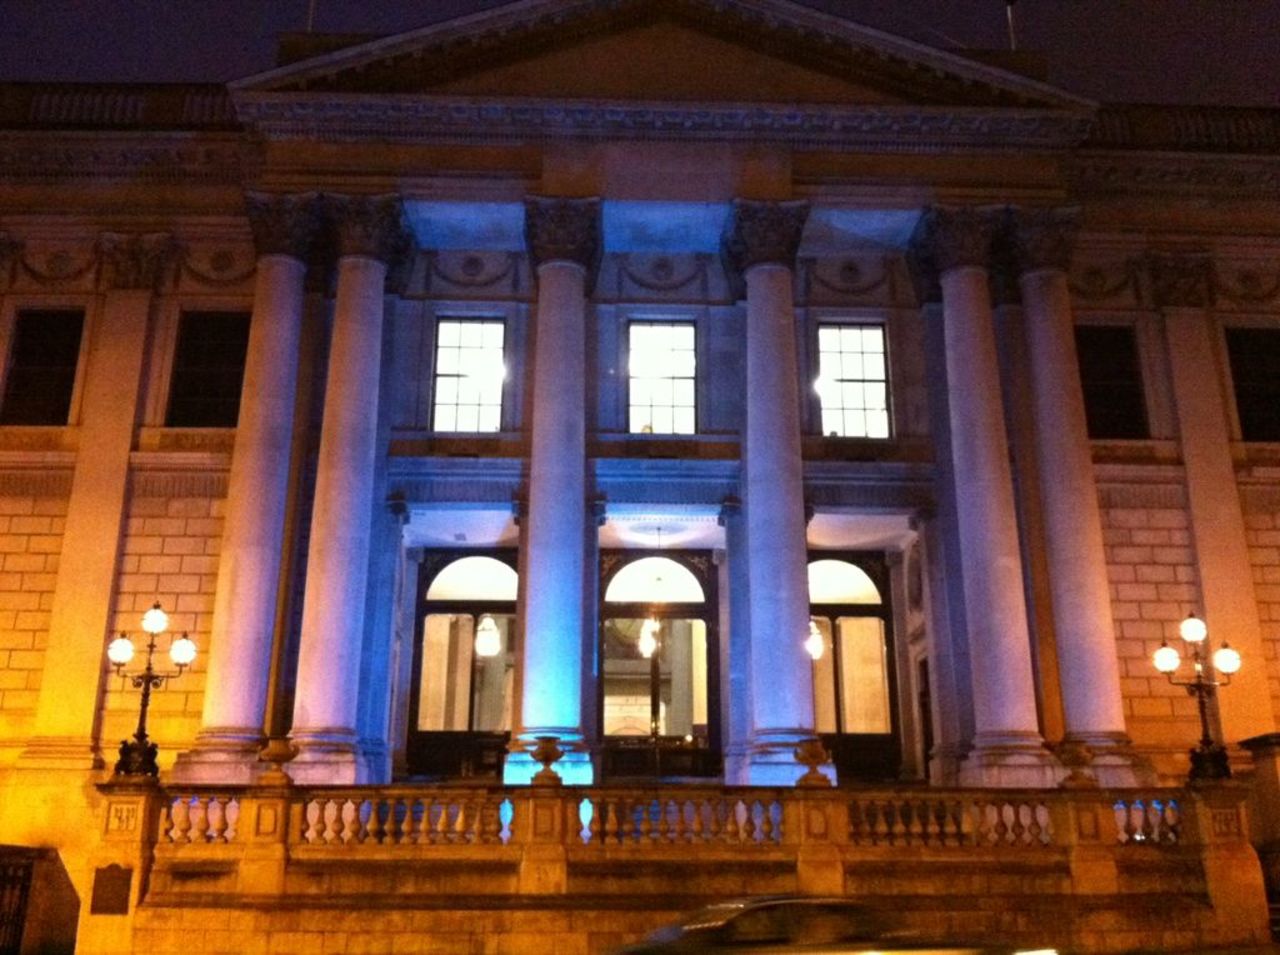 The city hall in Dublin, Ireland, lights up for the 2012 World Autism Awareness Day. 